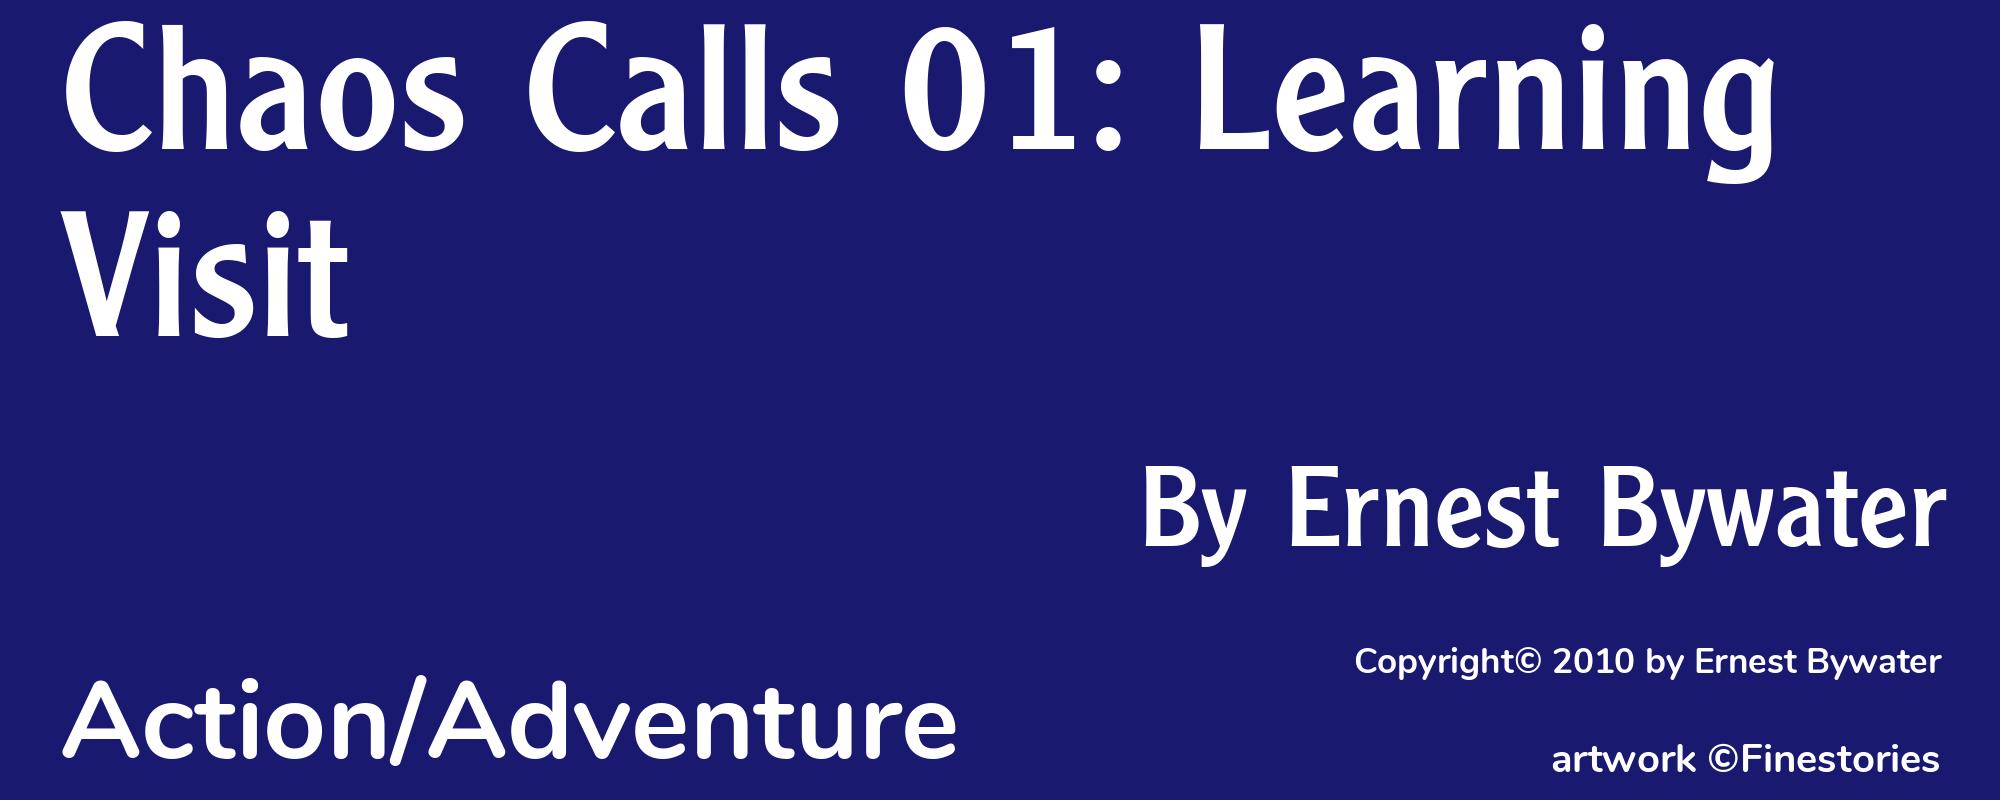 Chaos Calls 01: Learning Visit - Cover